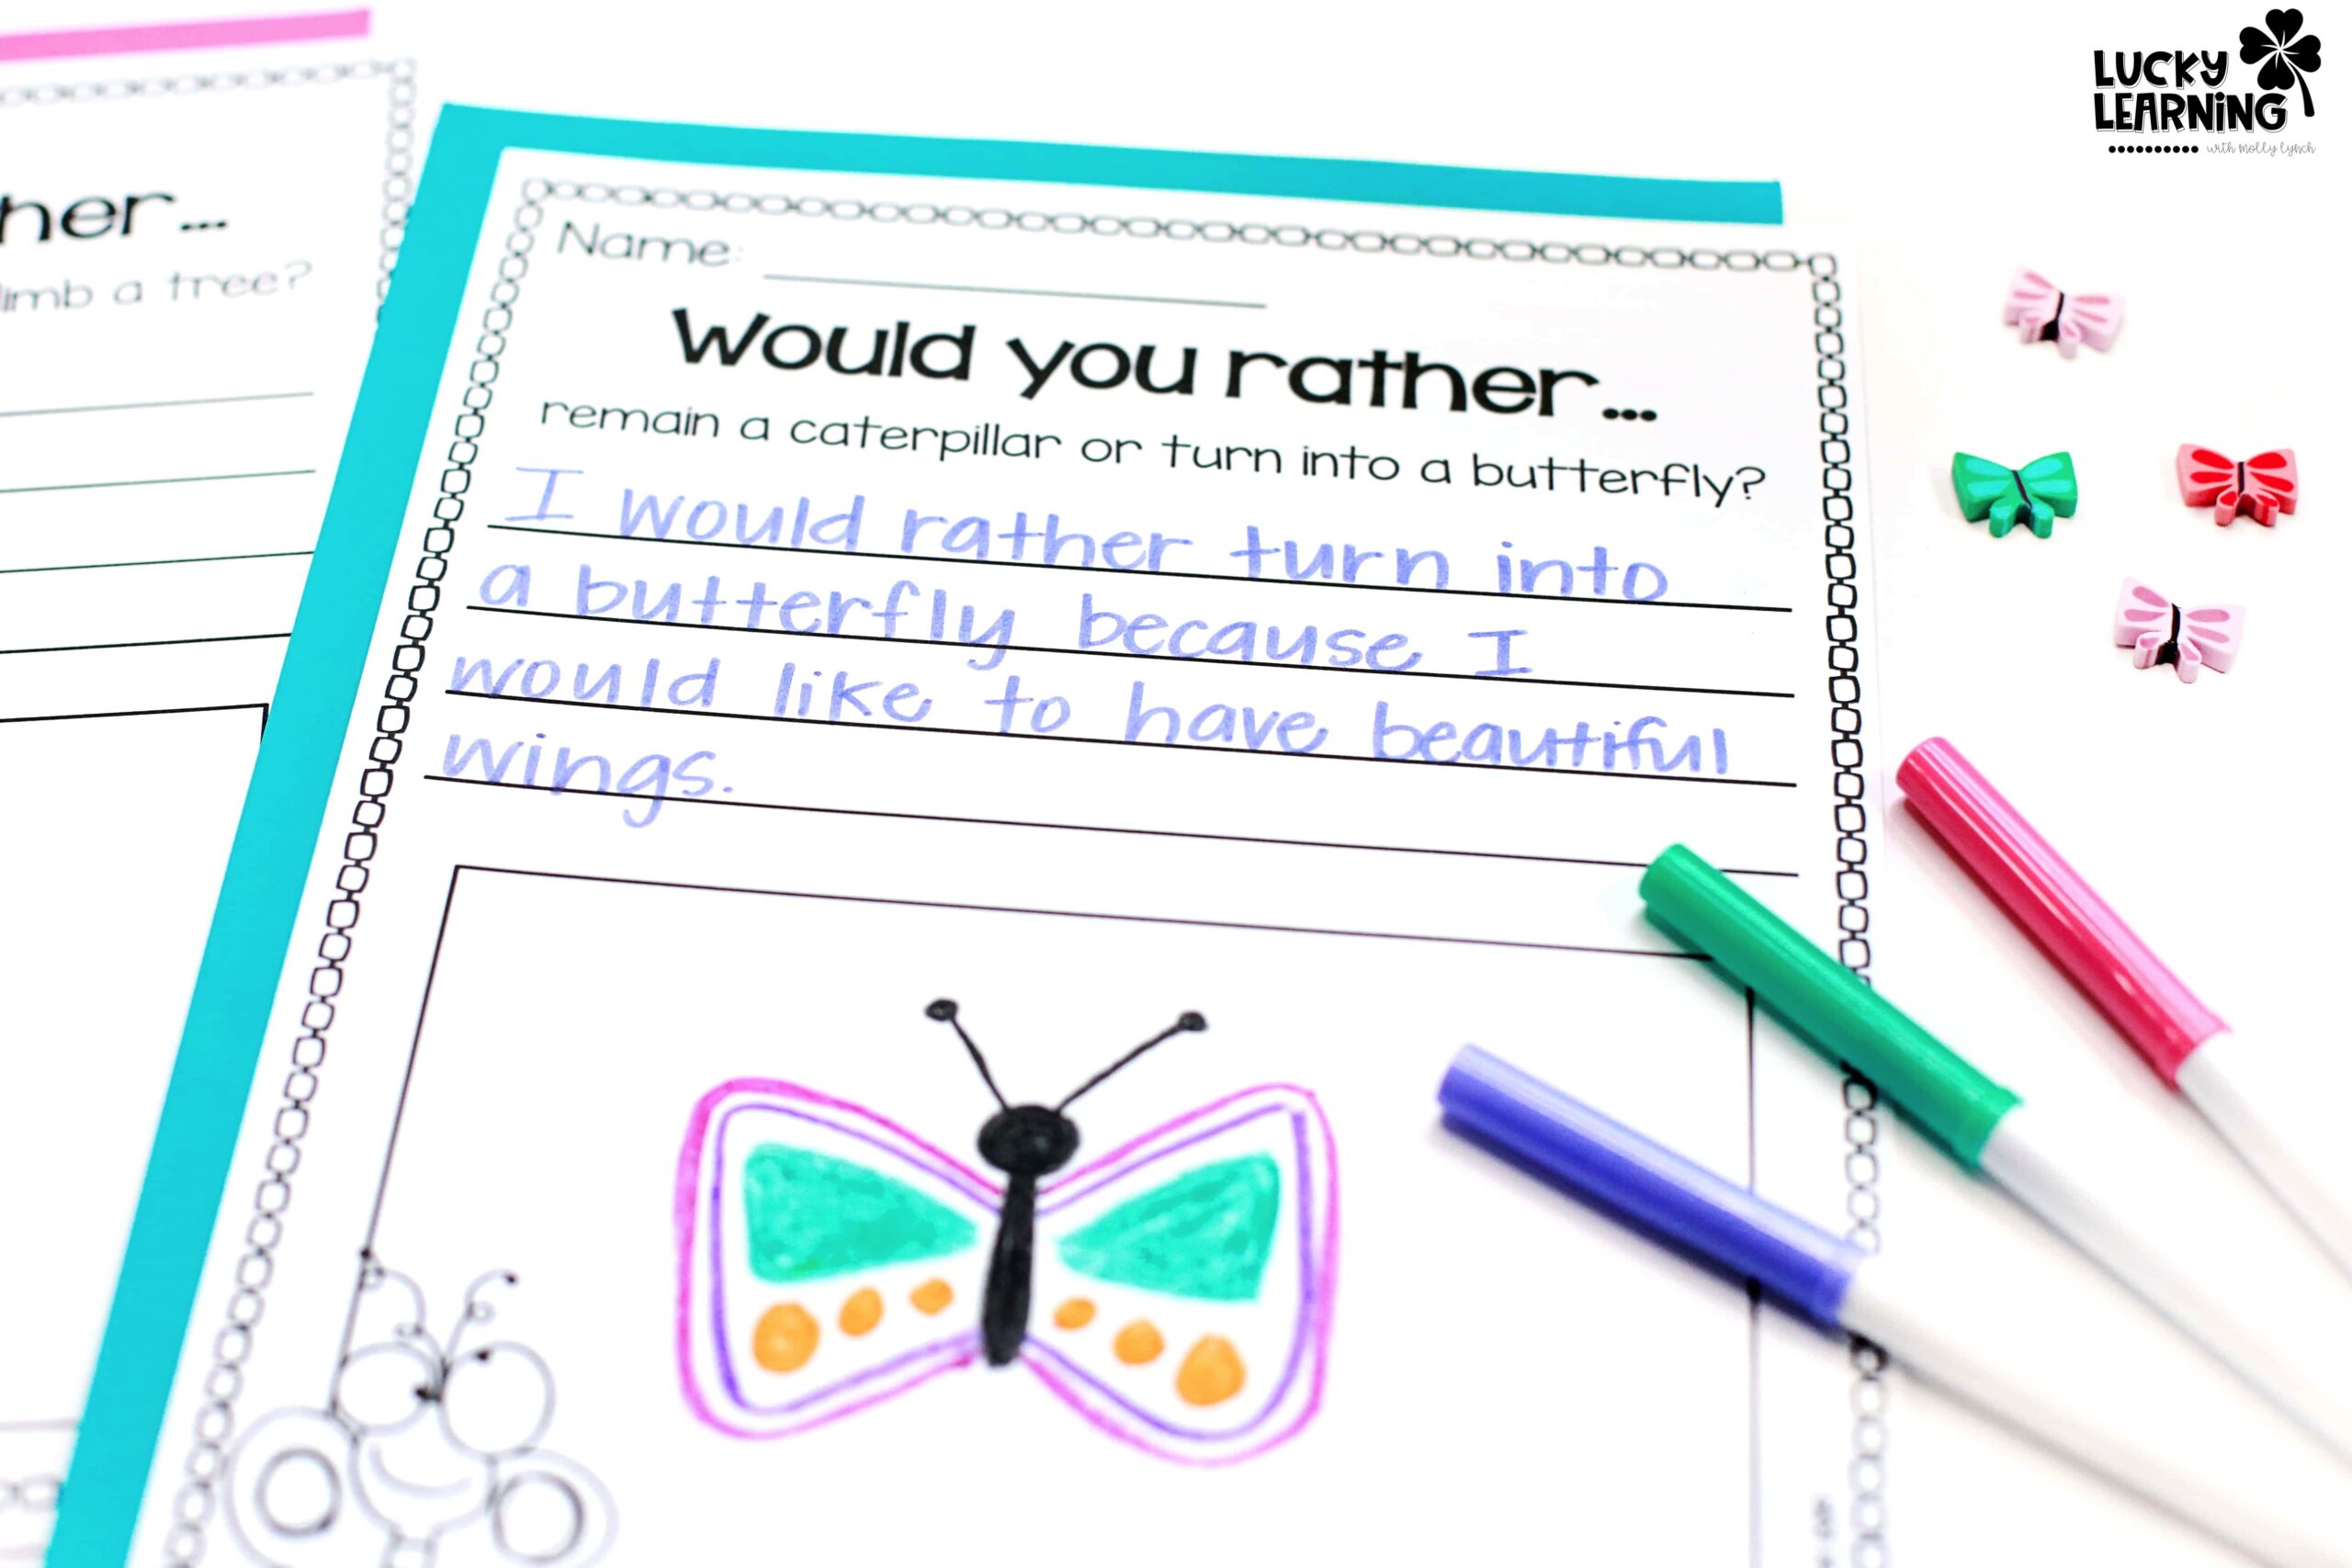 spring opinion writing activity printable | Lucky Learning with Molly Lynch